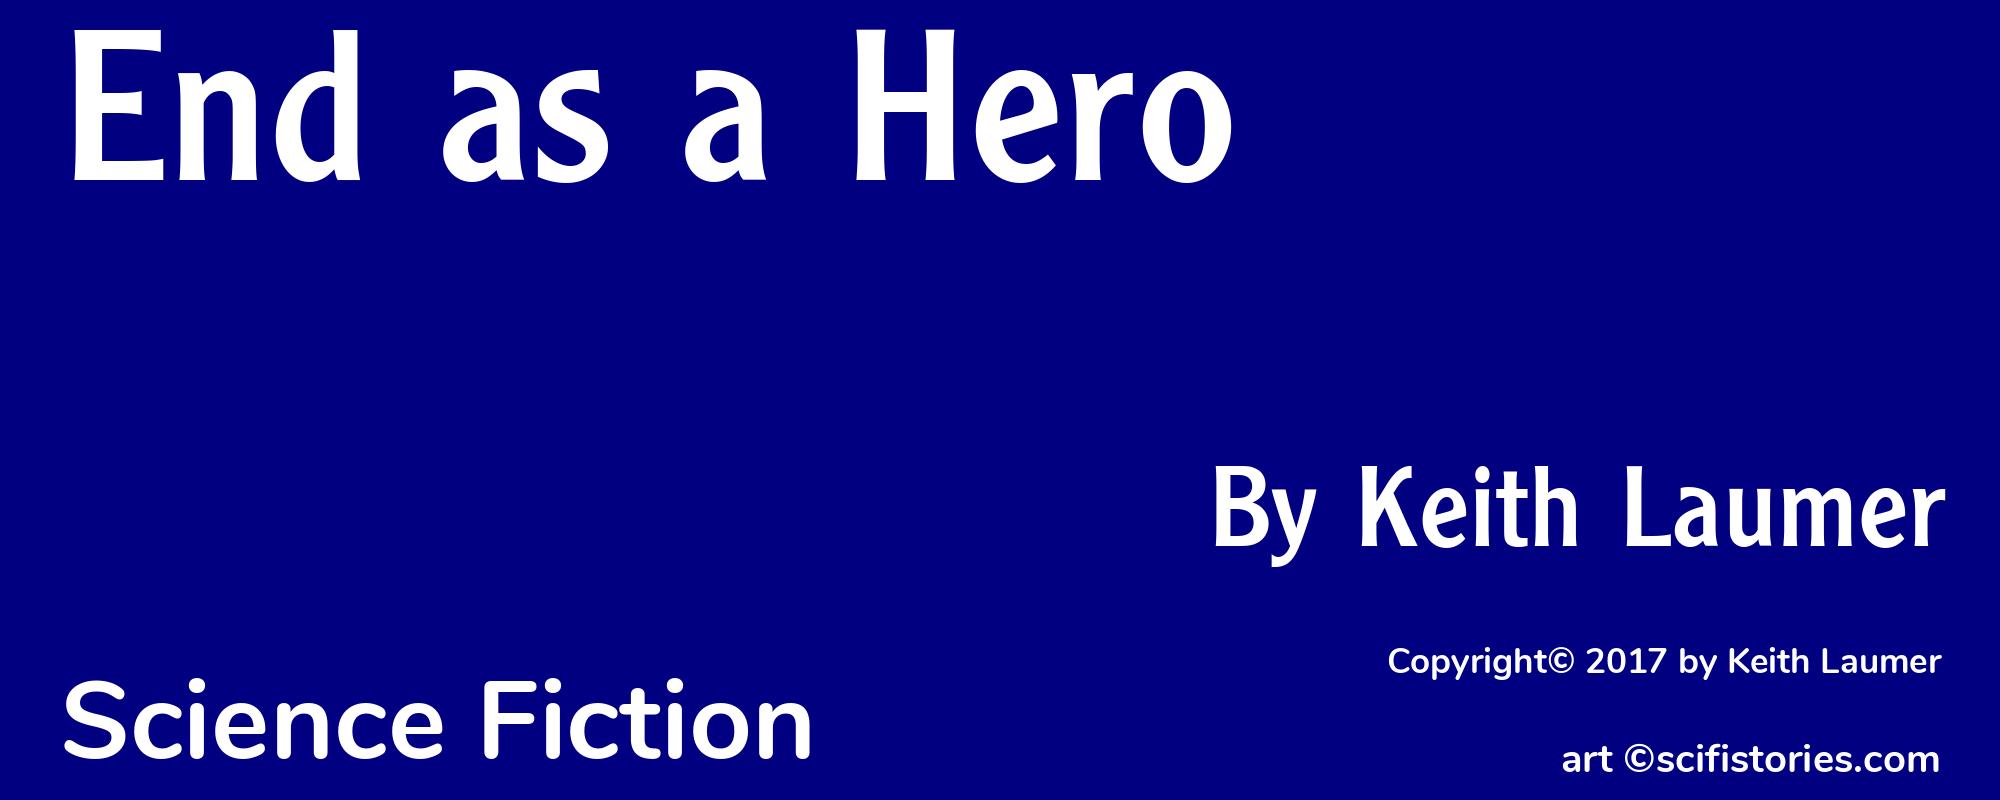 End as a Hero - Cover